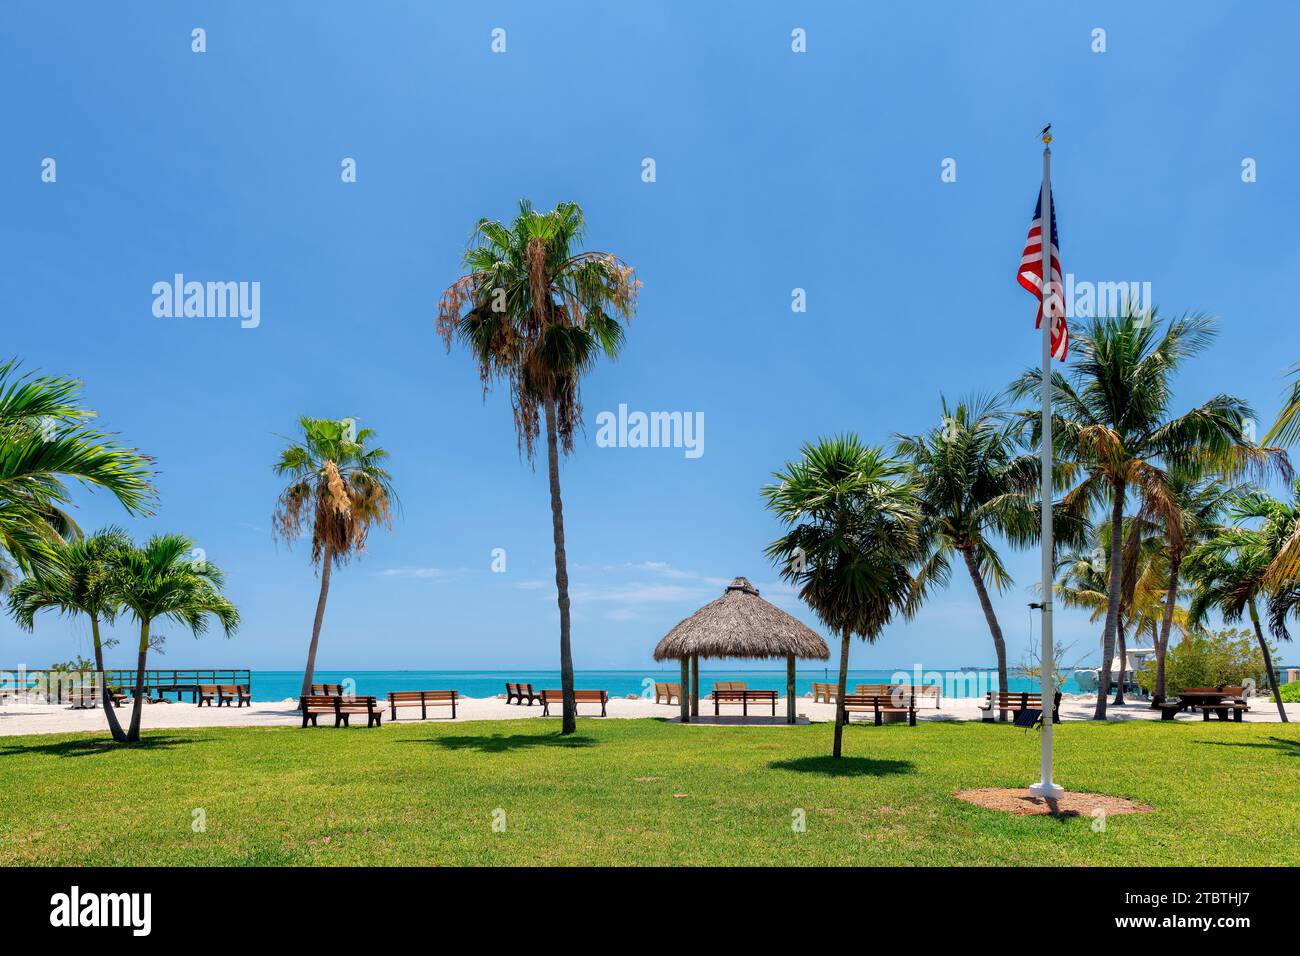 Palm trees in beach state park in tropical island in Key Largo, Florida Stock Photo